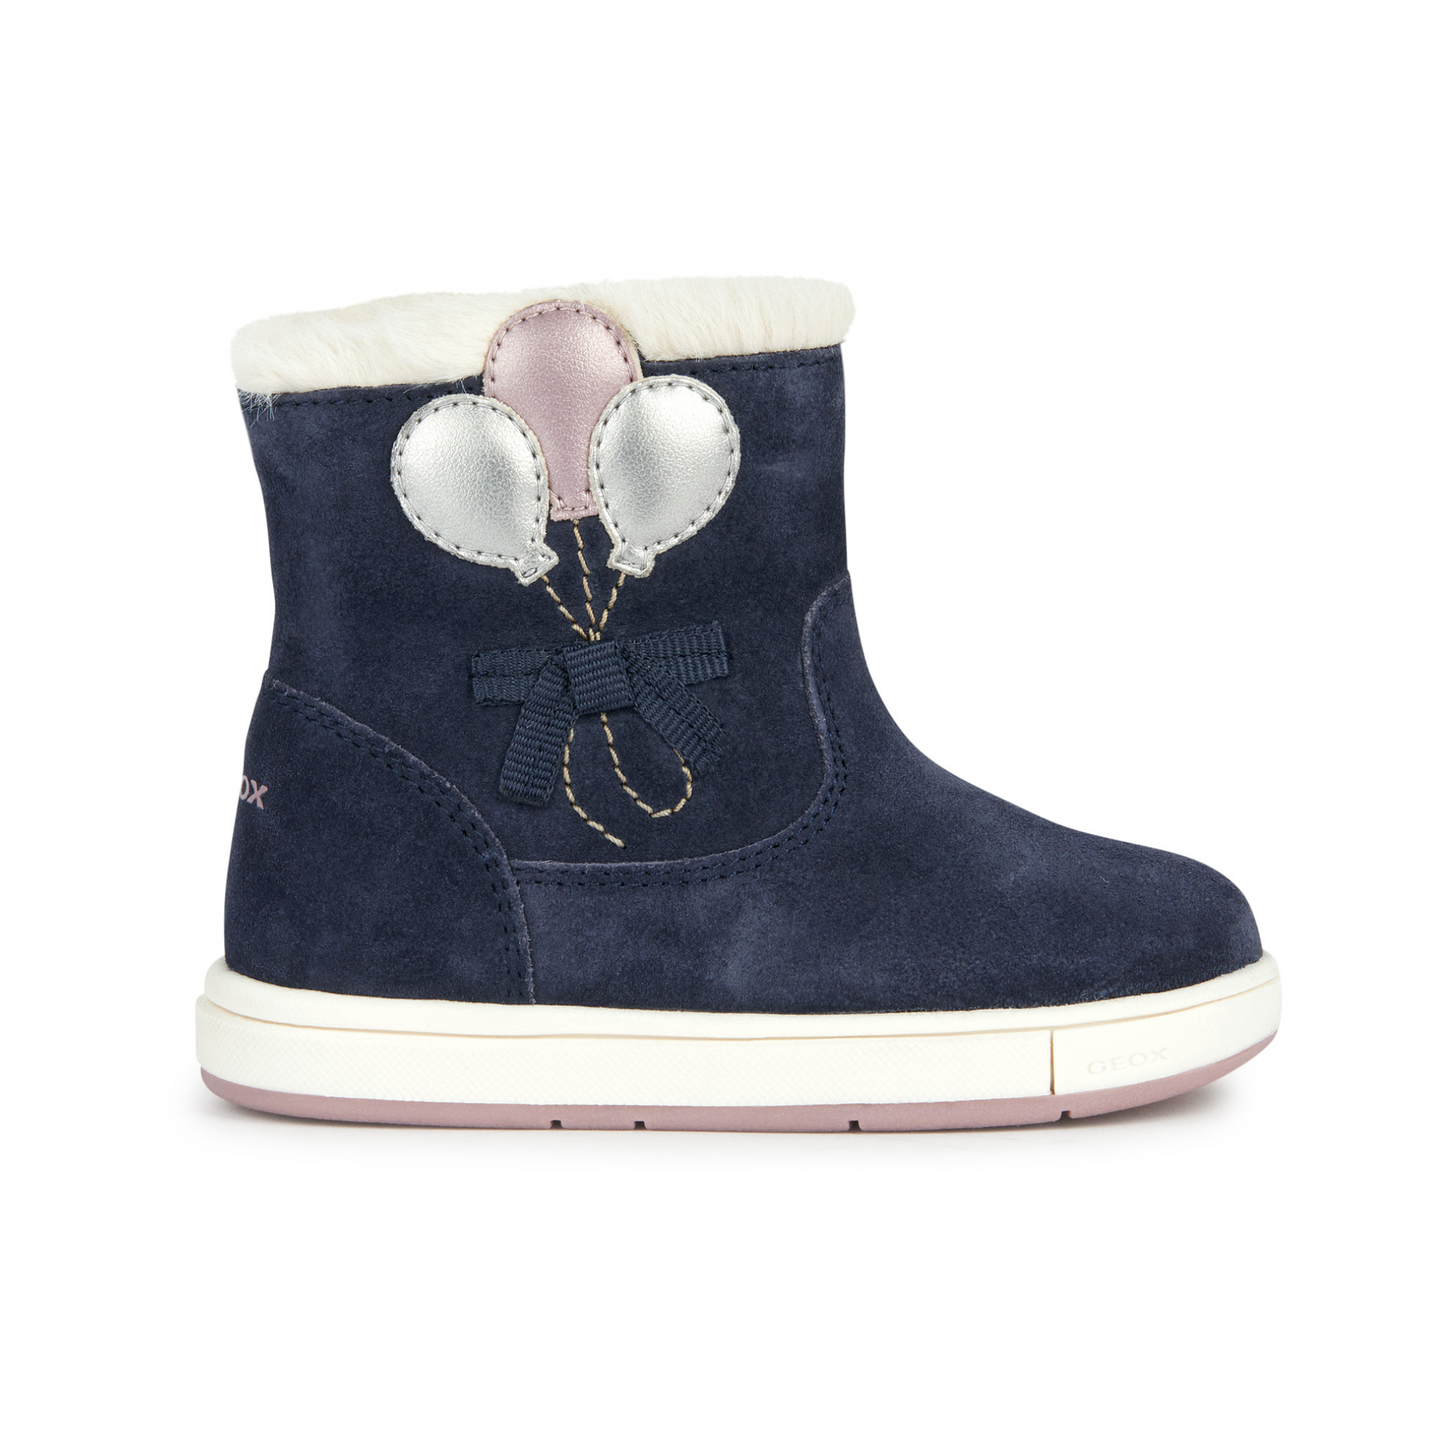 Trottola Baby Girl's Navy Pink Lined Suede Boot